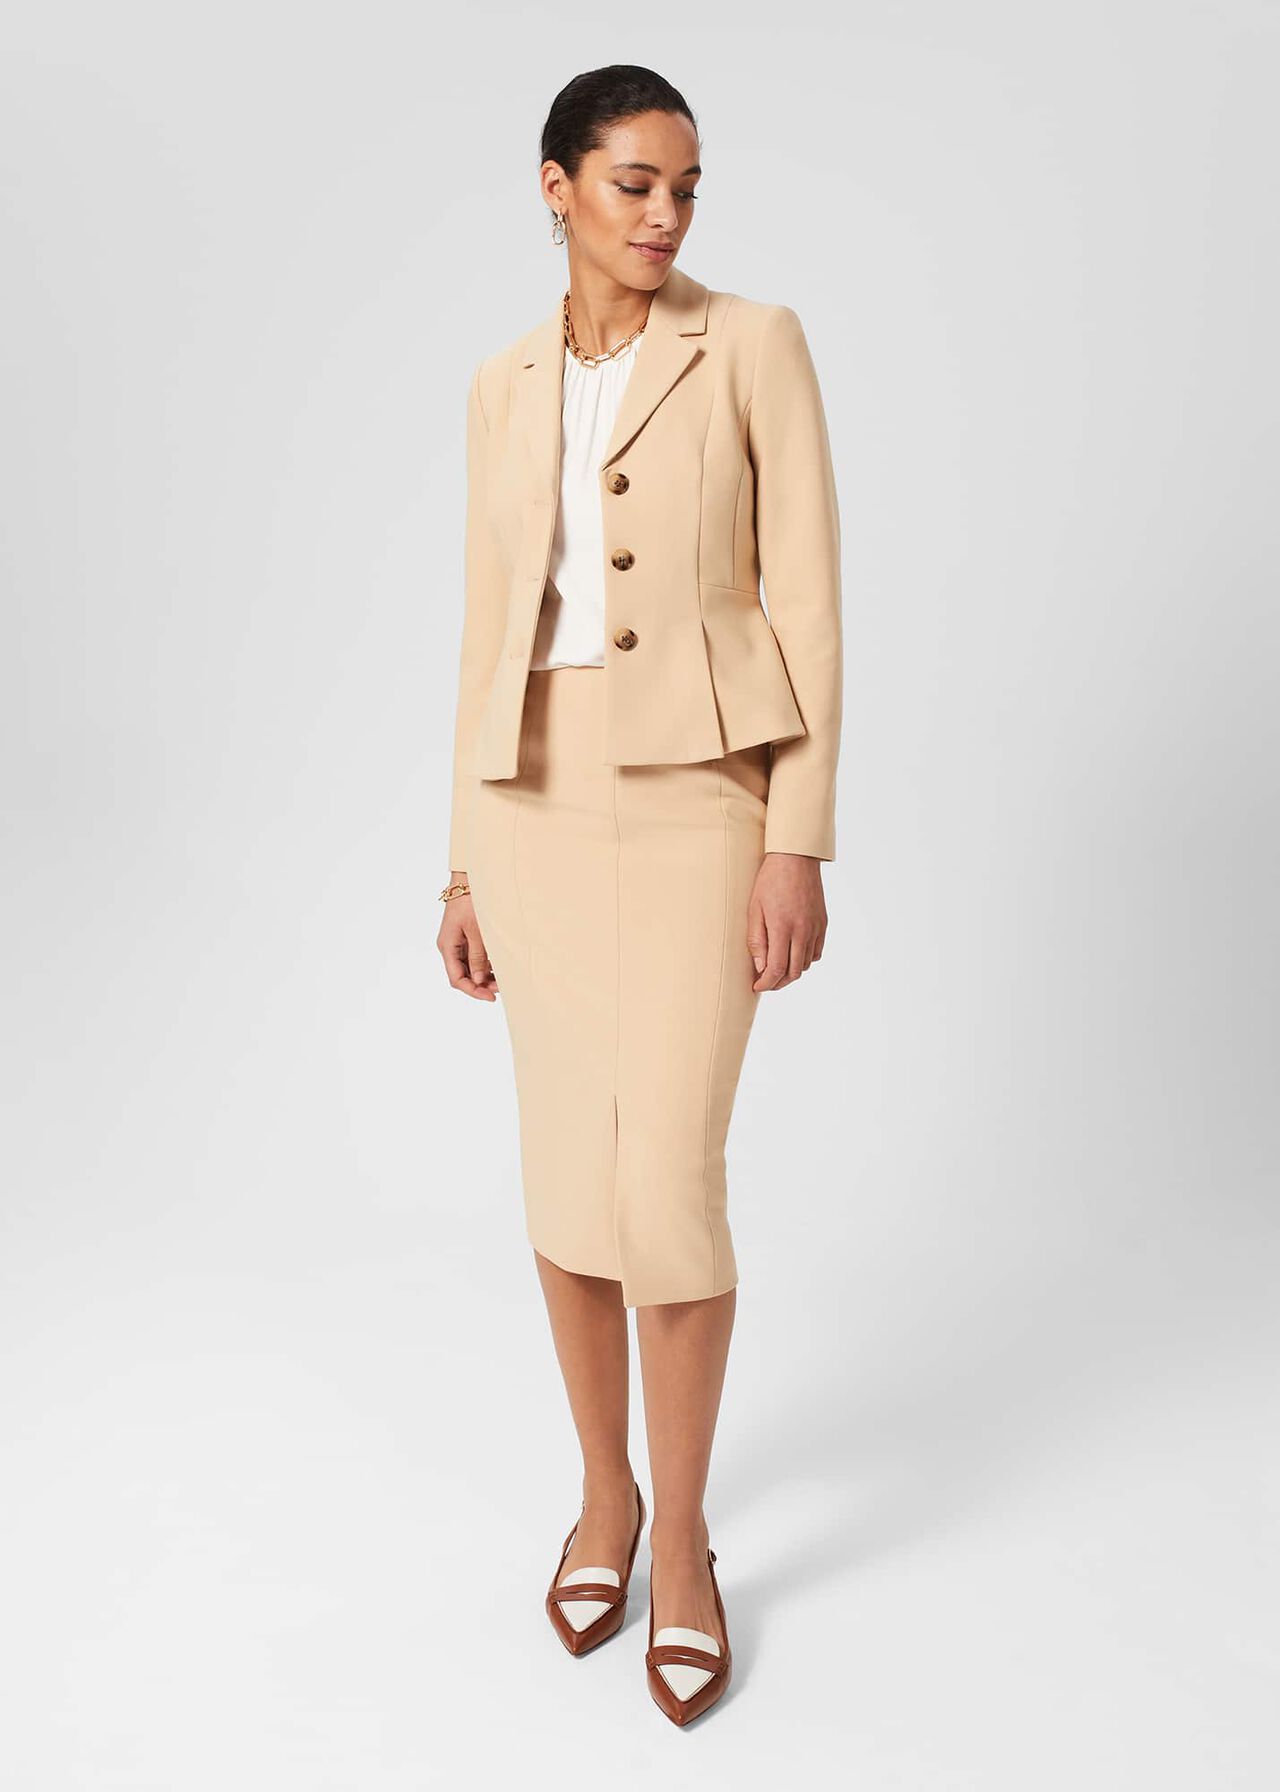 Beatrice Skirt Suit Outfit